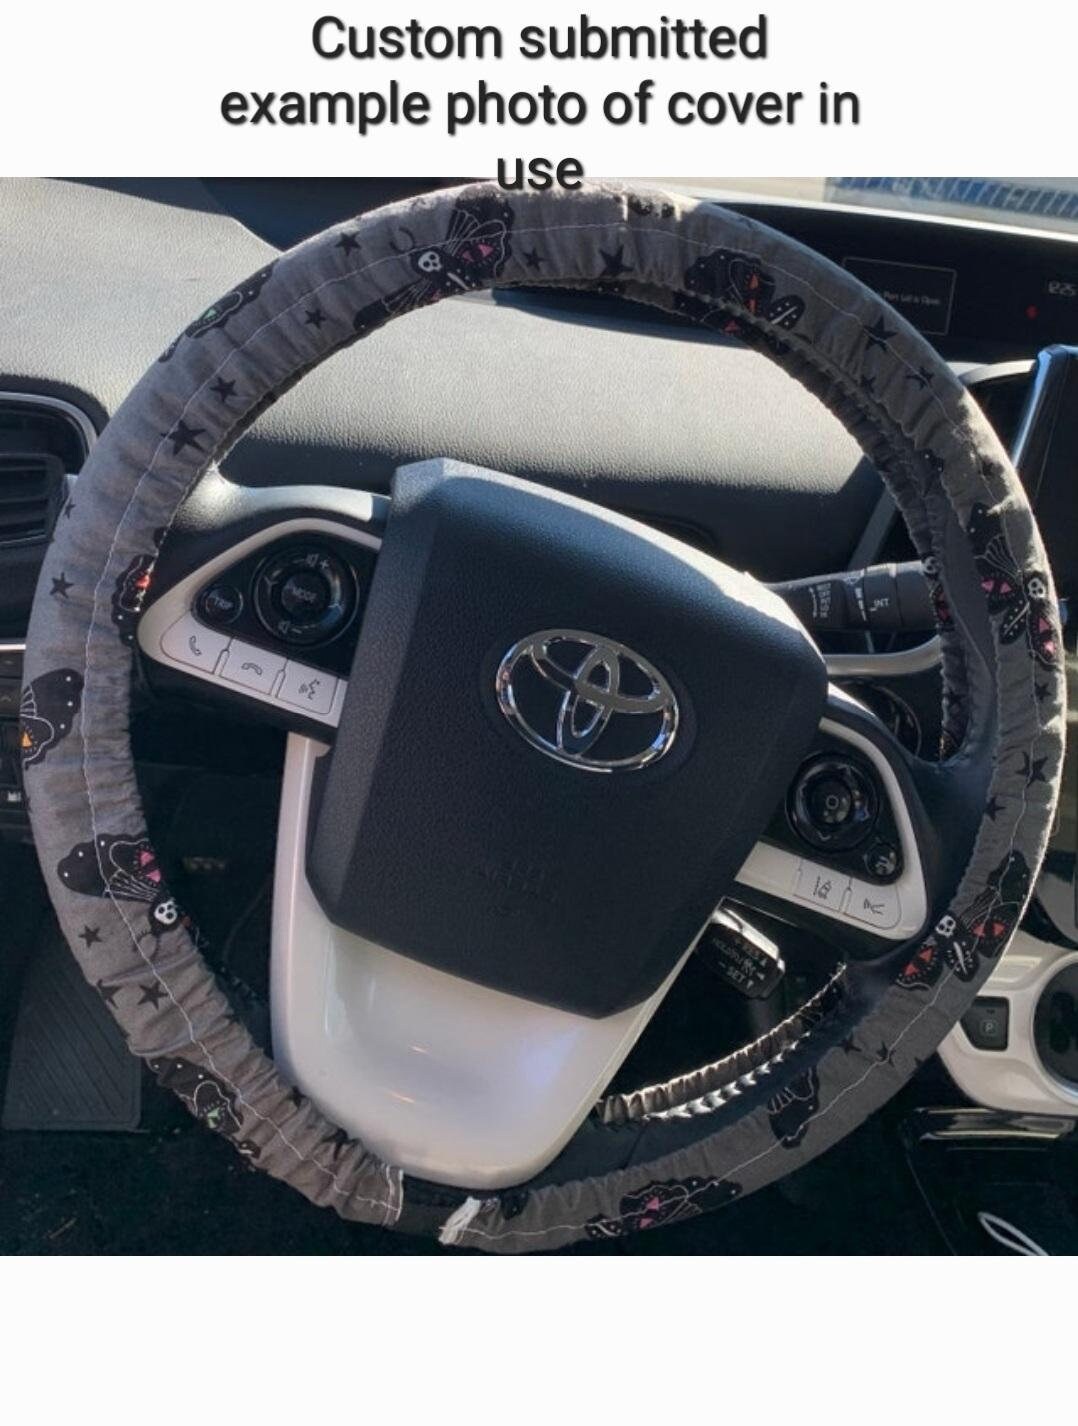 Rose Steering Wheel Cover, 100% Cotton, Washable, Custom Car Accessories - Harlow's Store and Garden Gifts